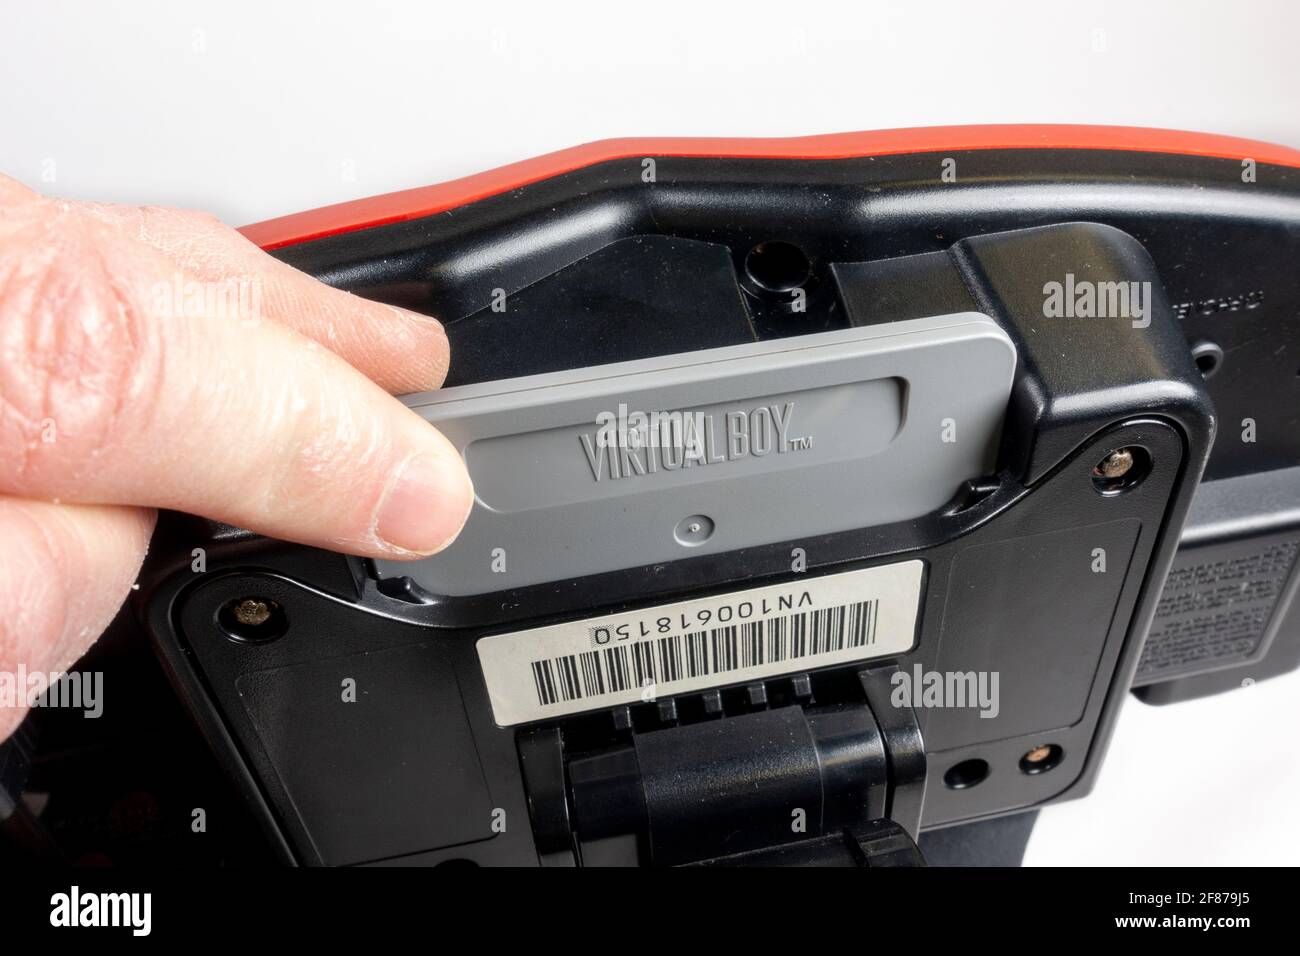 Cartridge in the slot of a Nintendo Virtual Boy table-top video game console, first launched in Japan in 1995, (it did not launch in Europe). Stock Photo